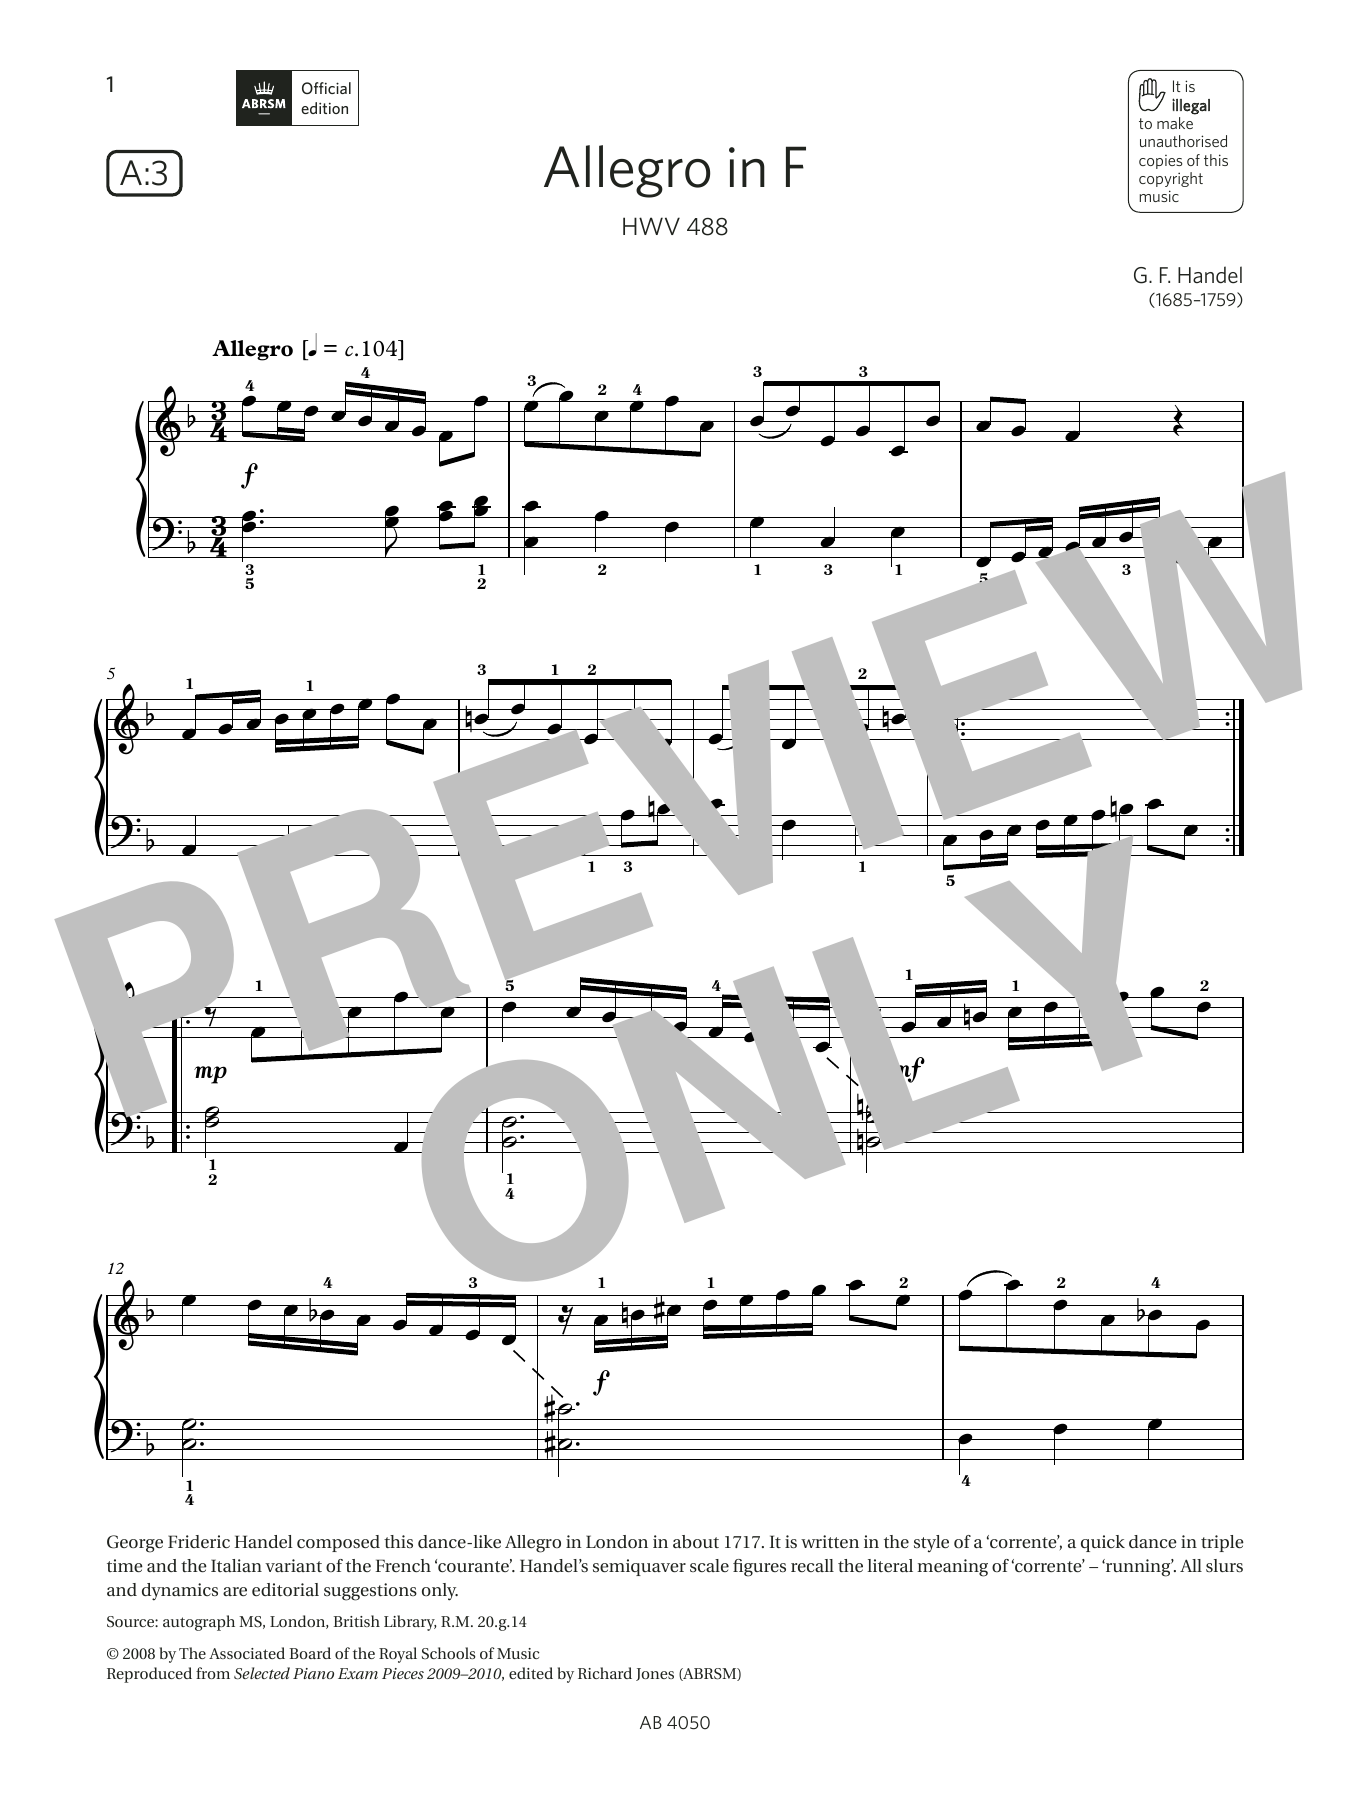 Download G F Handel Allegro in F (Grade 4, list A3, from th Sheet Music